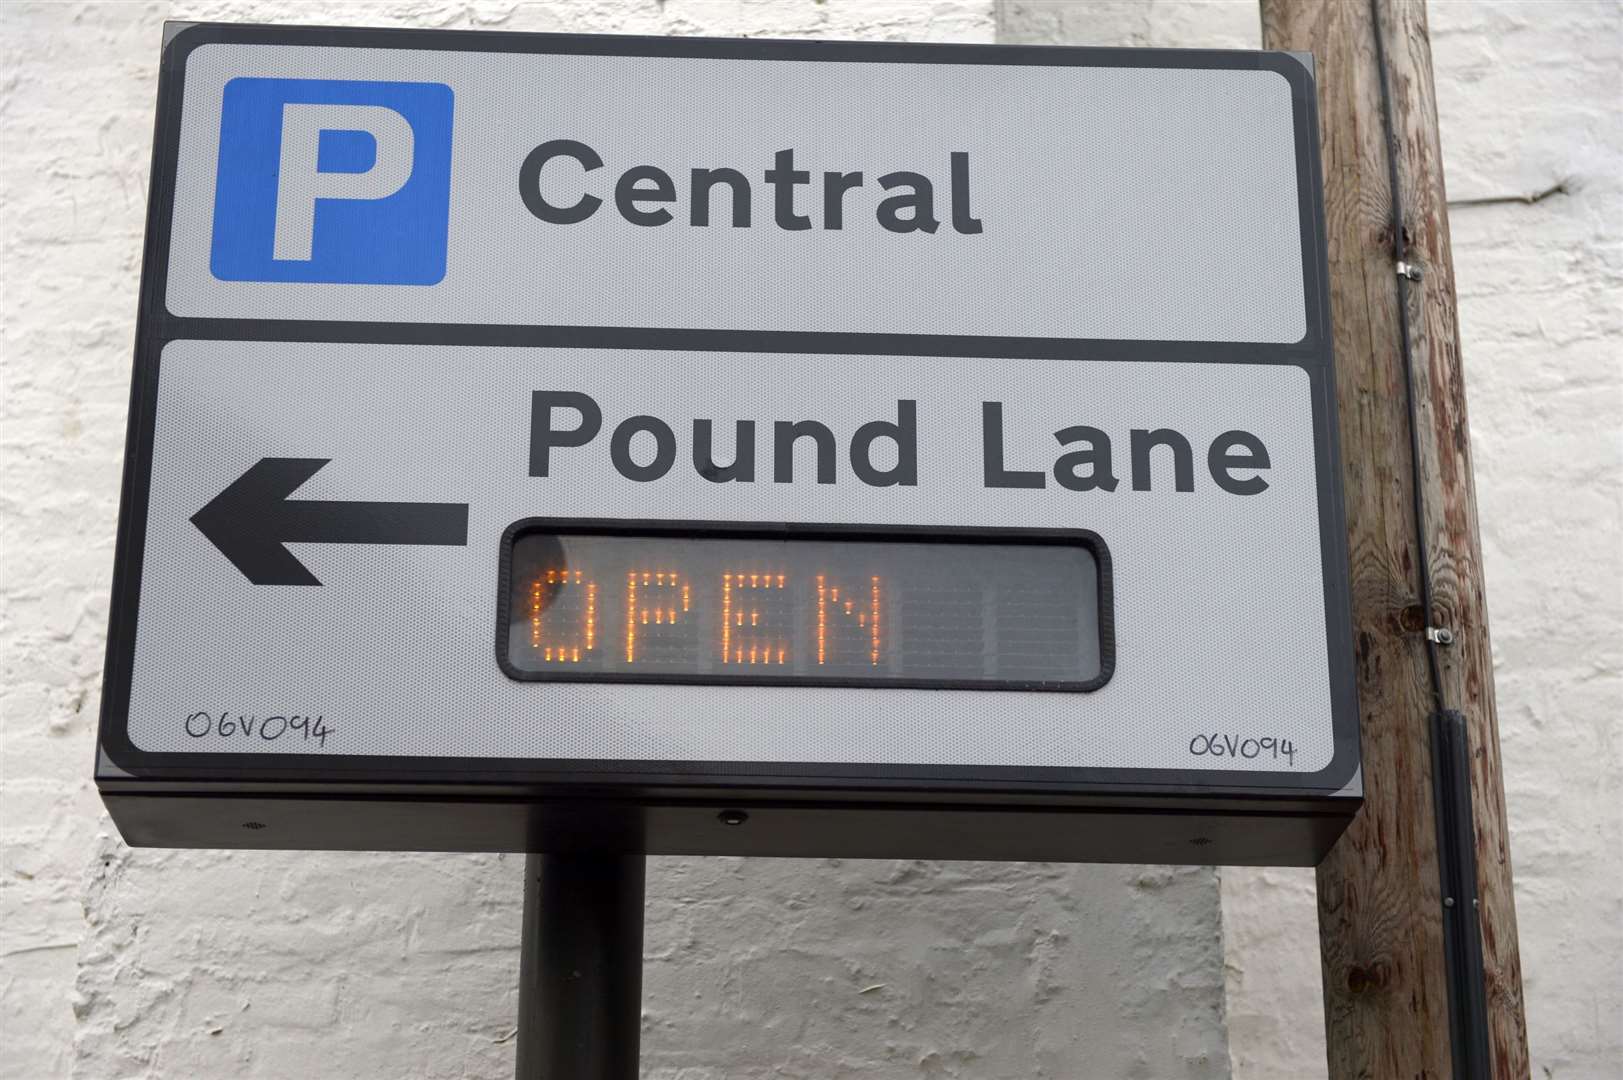 Pound Lane car park will see its rates increase